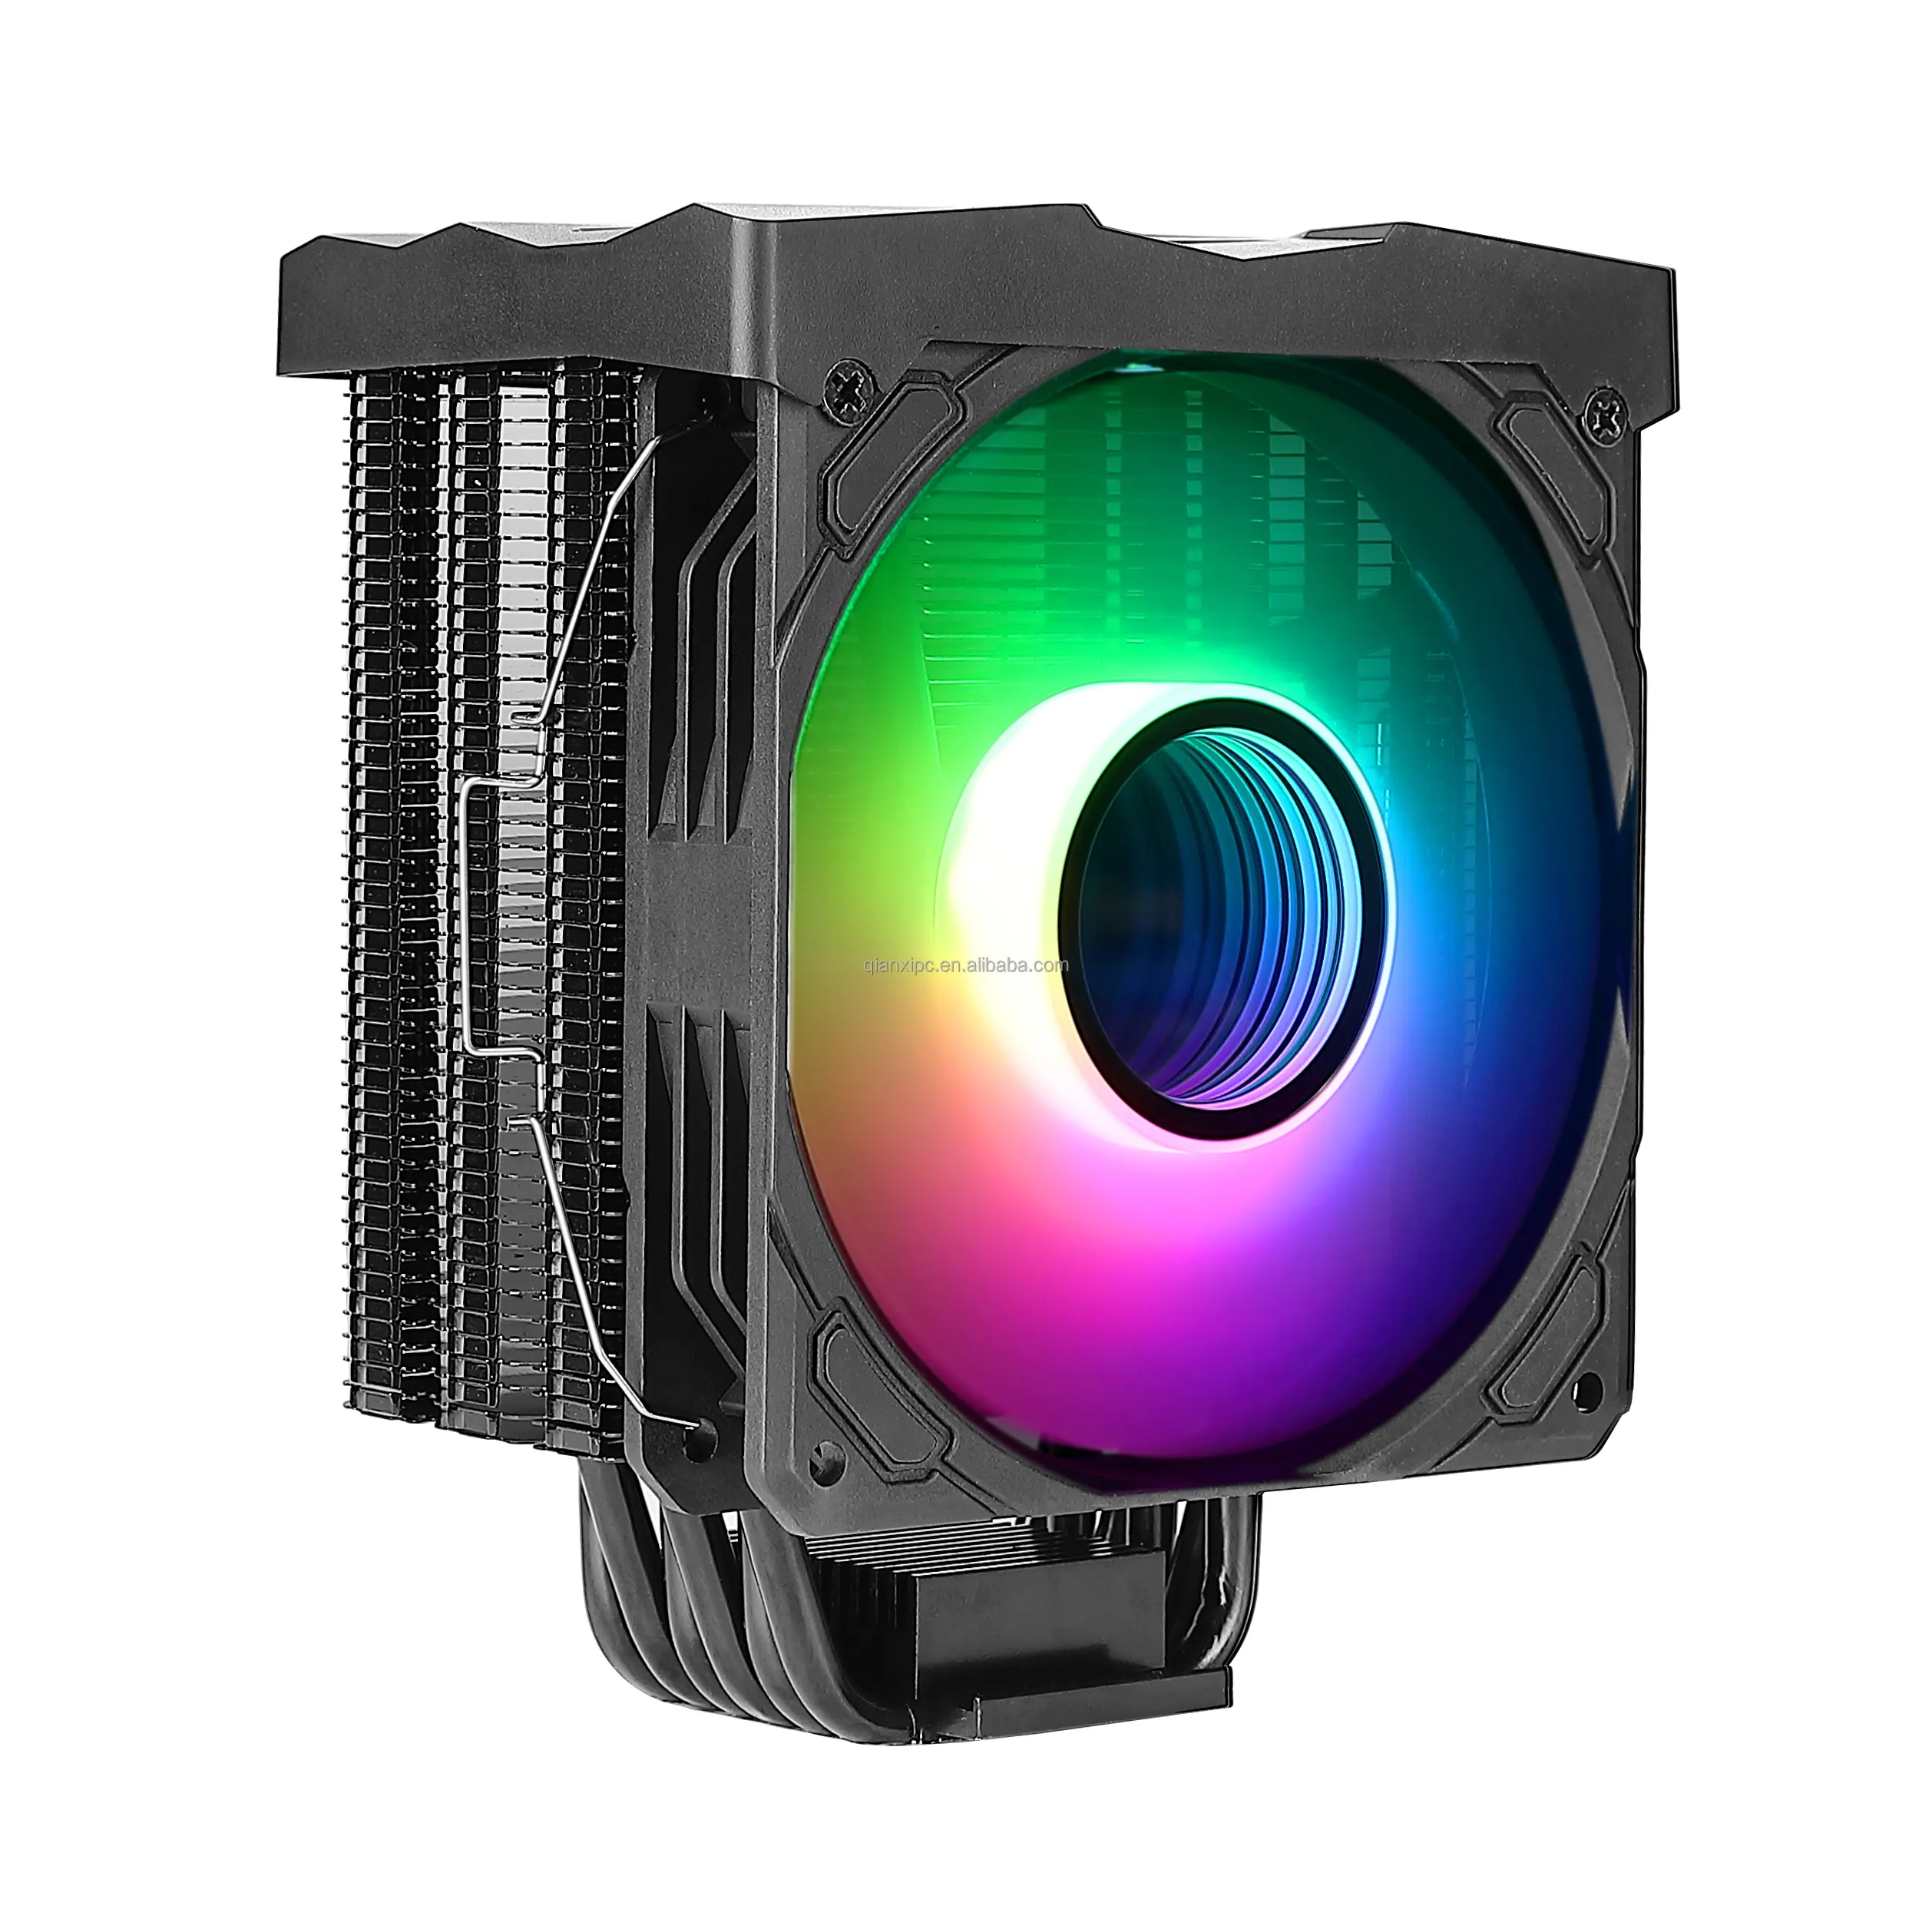 Black Color Gaming Computer Tower ARGB Cpu cooler Air Cooling 6 Heat pipes Sync with Motherboard